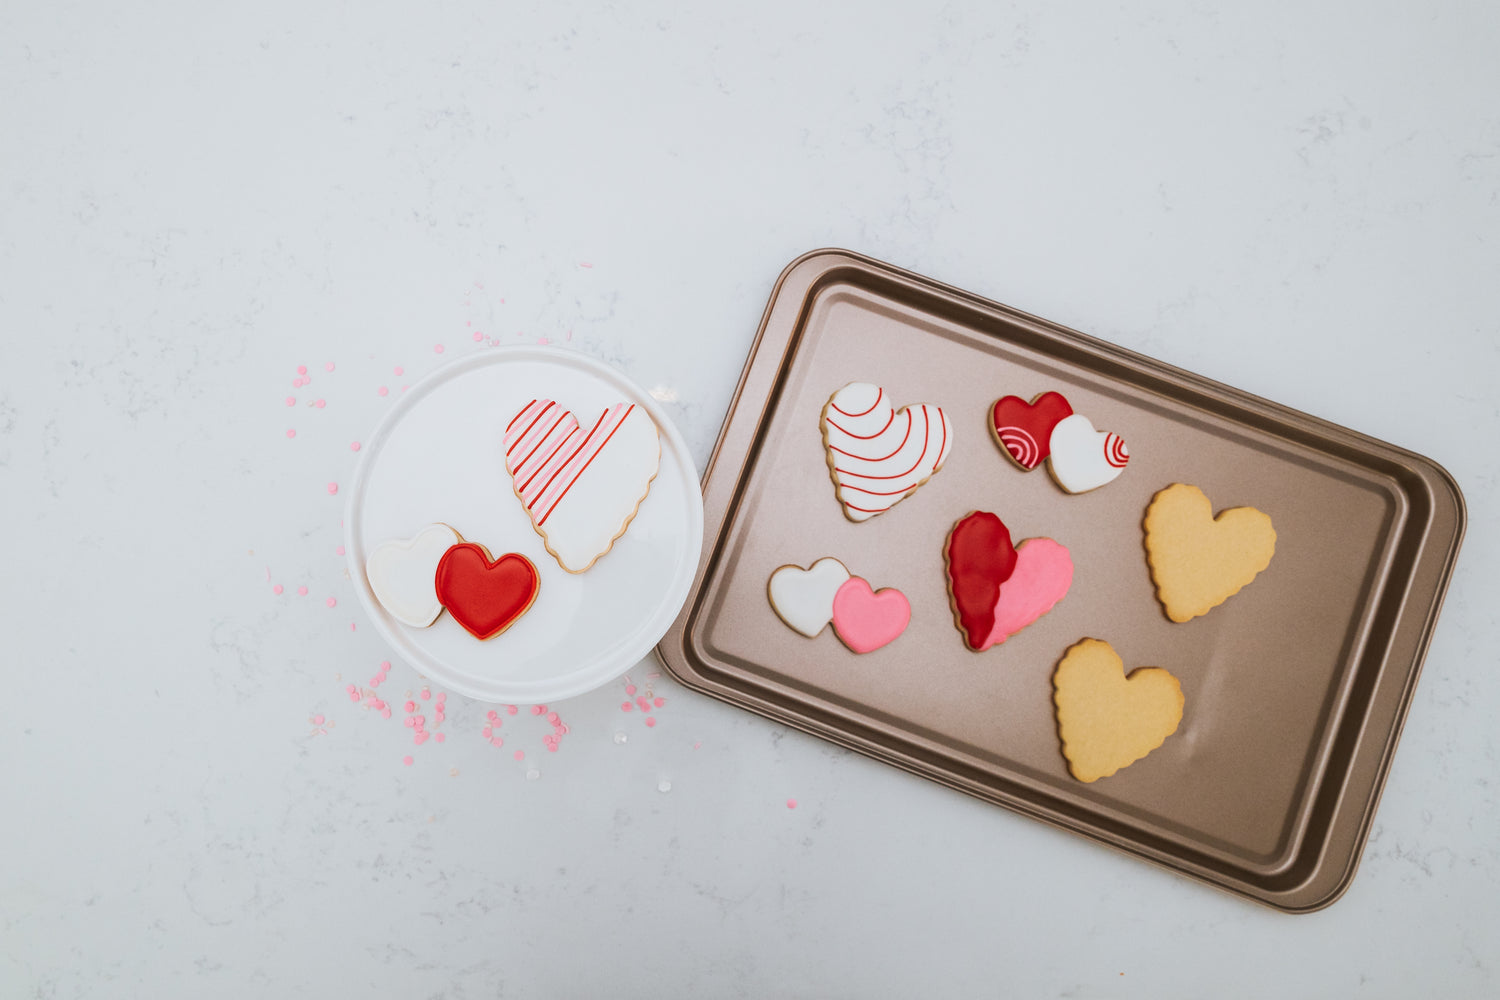 Lifestyle image of decorated heart shaped cookies on a plater and baking sheet